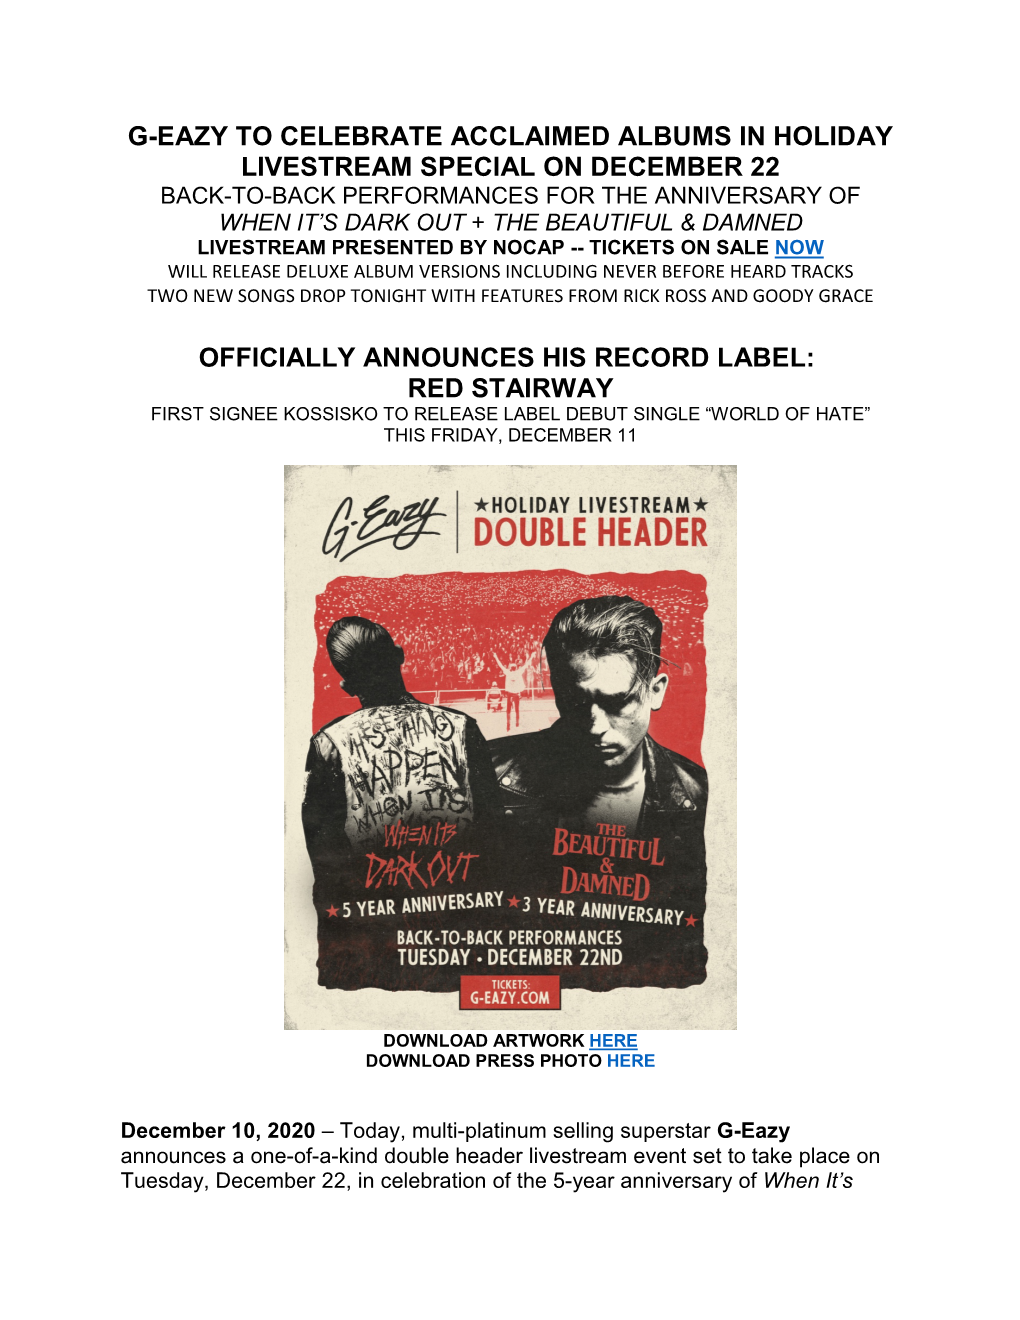 G-Eazy to Celebrate Acclaimed Albums in Holiday Livestream Special on December 22 Officially Announces His Record Label: Red St